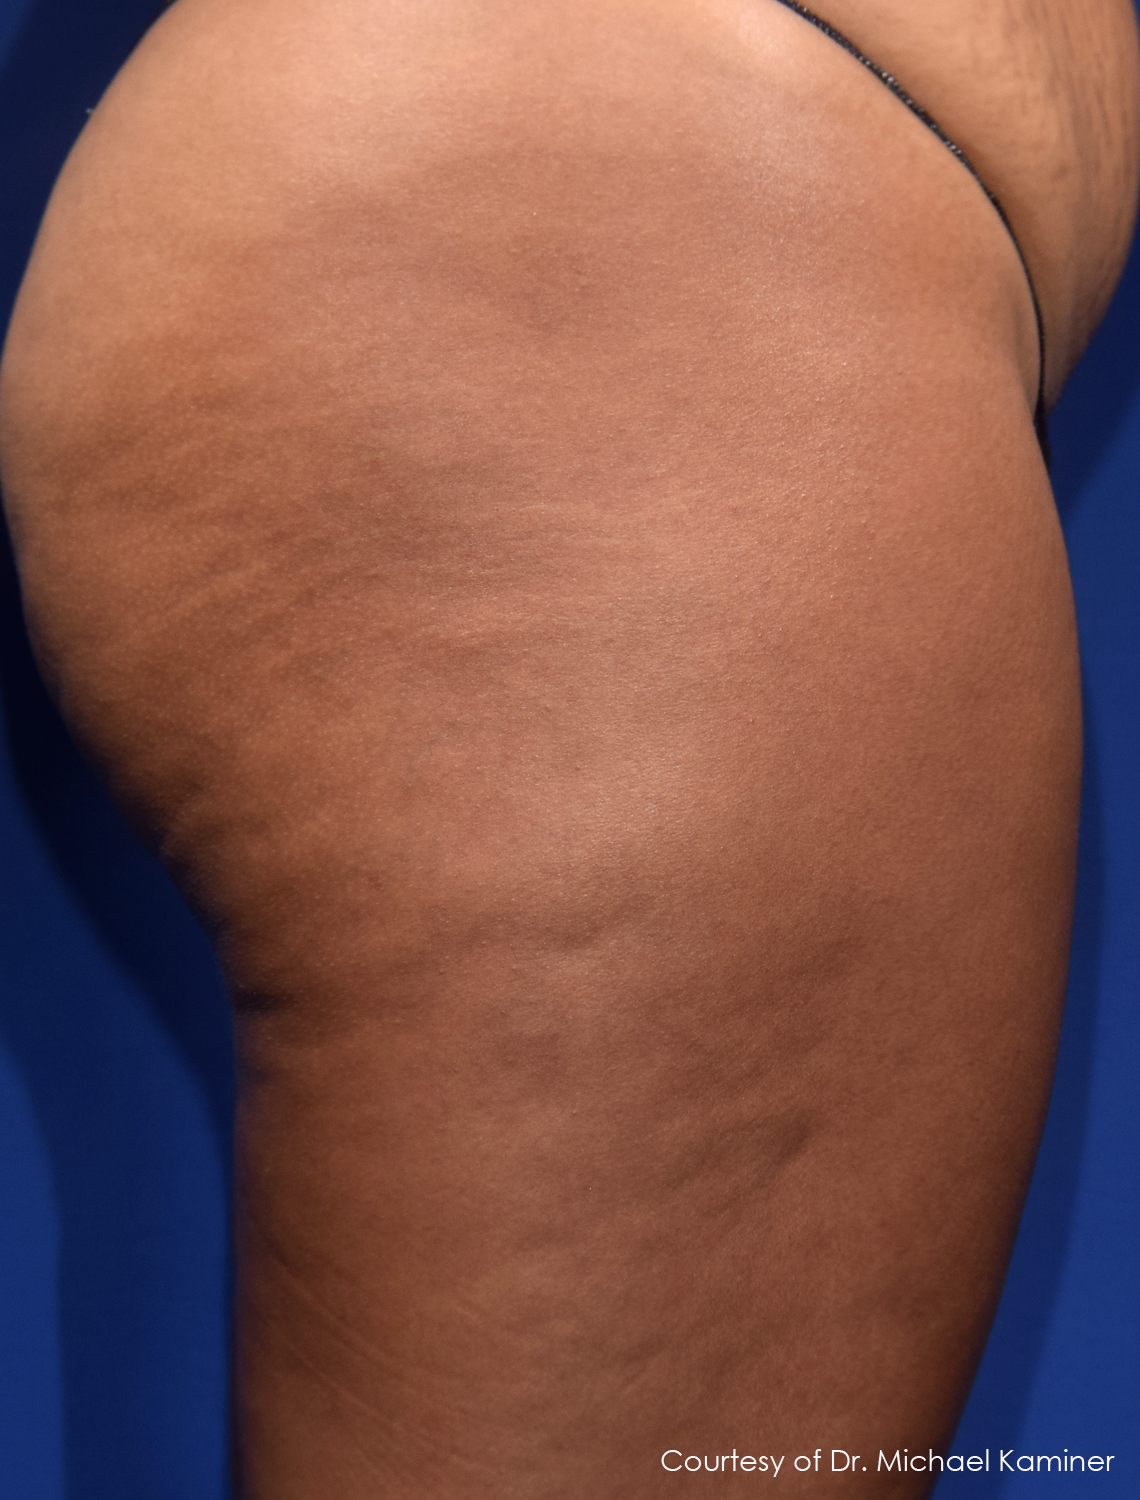 This New Noninvasive Treatment Gets Rid of Cellulite Using Sound Waves   NewBeauty